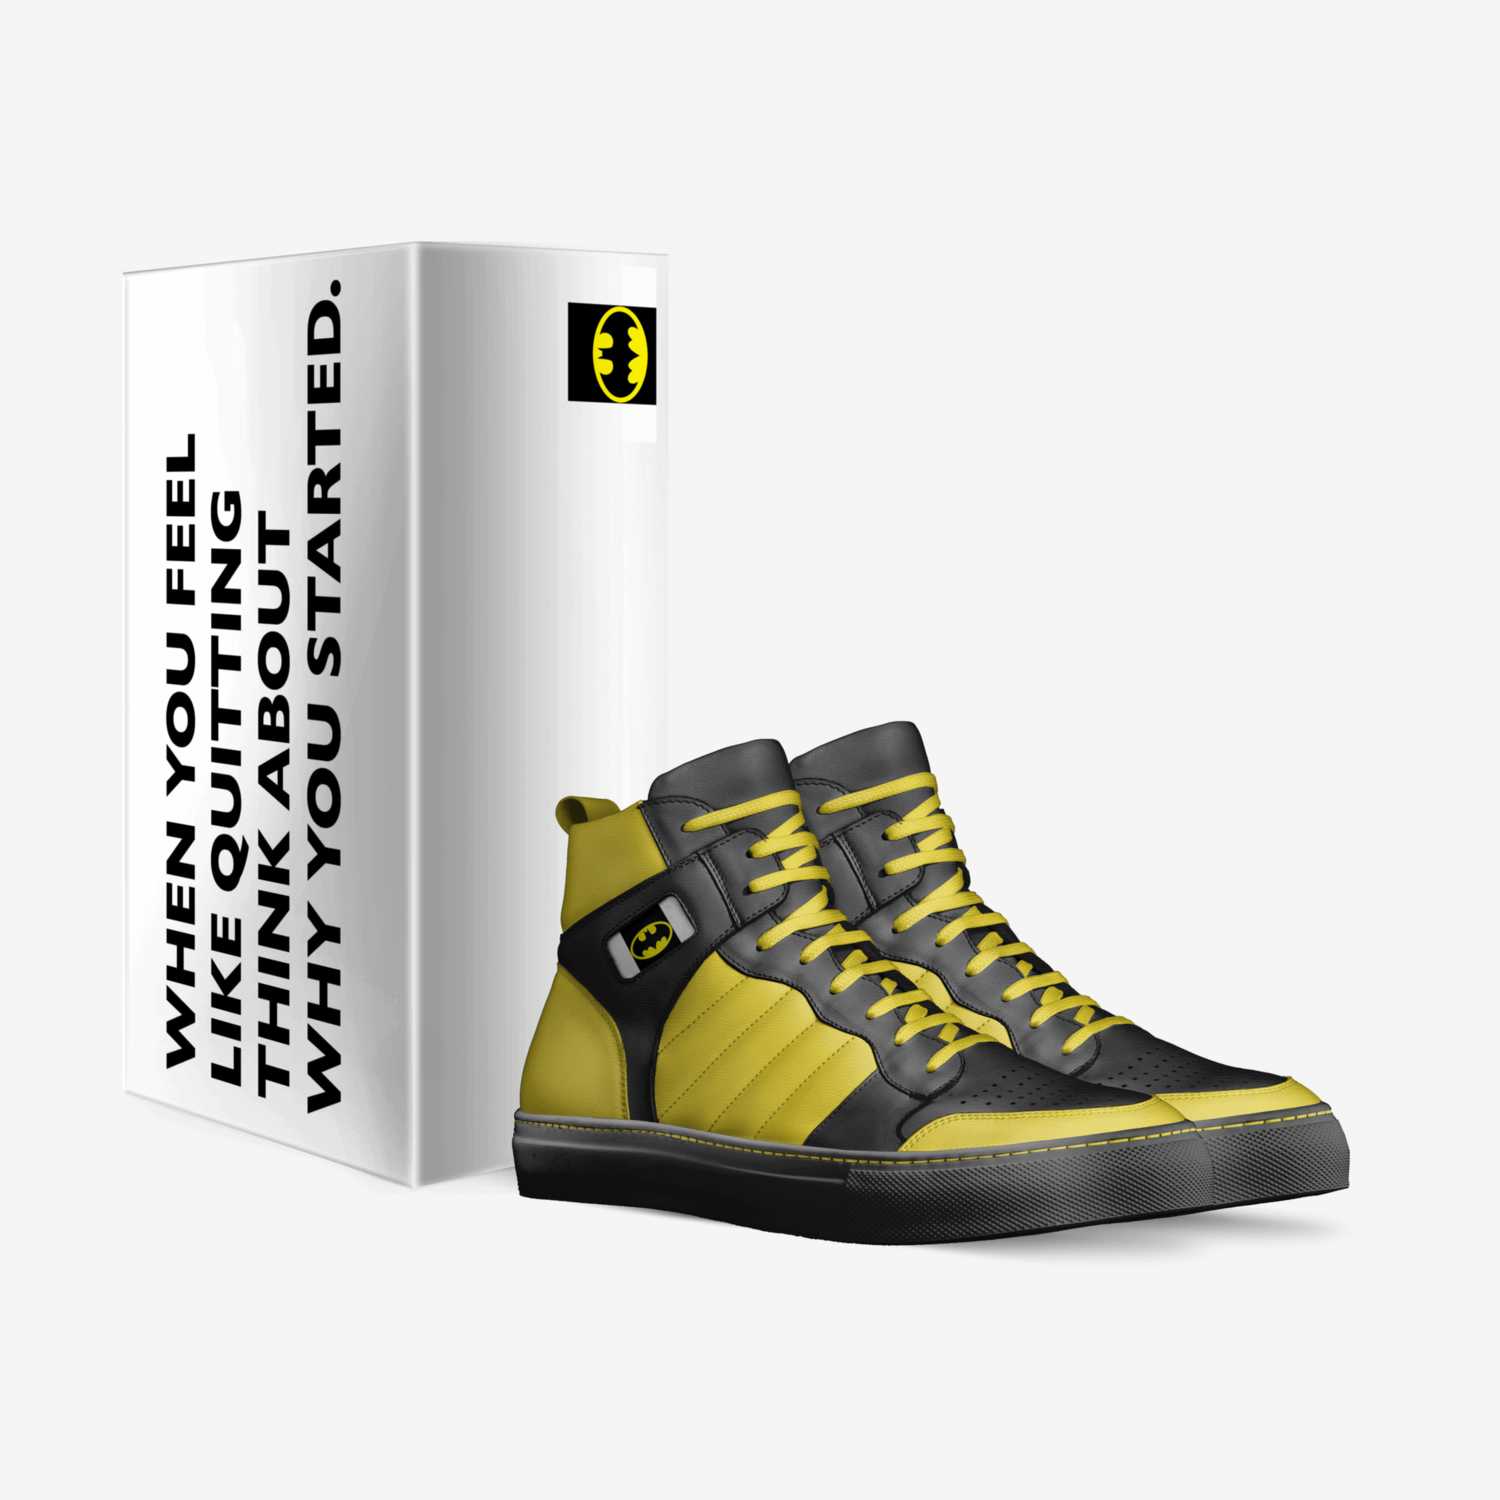 Batmanpower custom made in Italy shoes by Money Pow | Box view